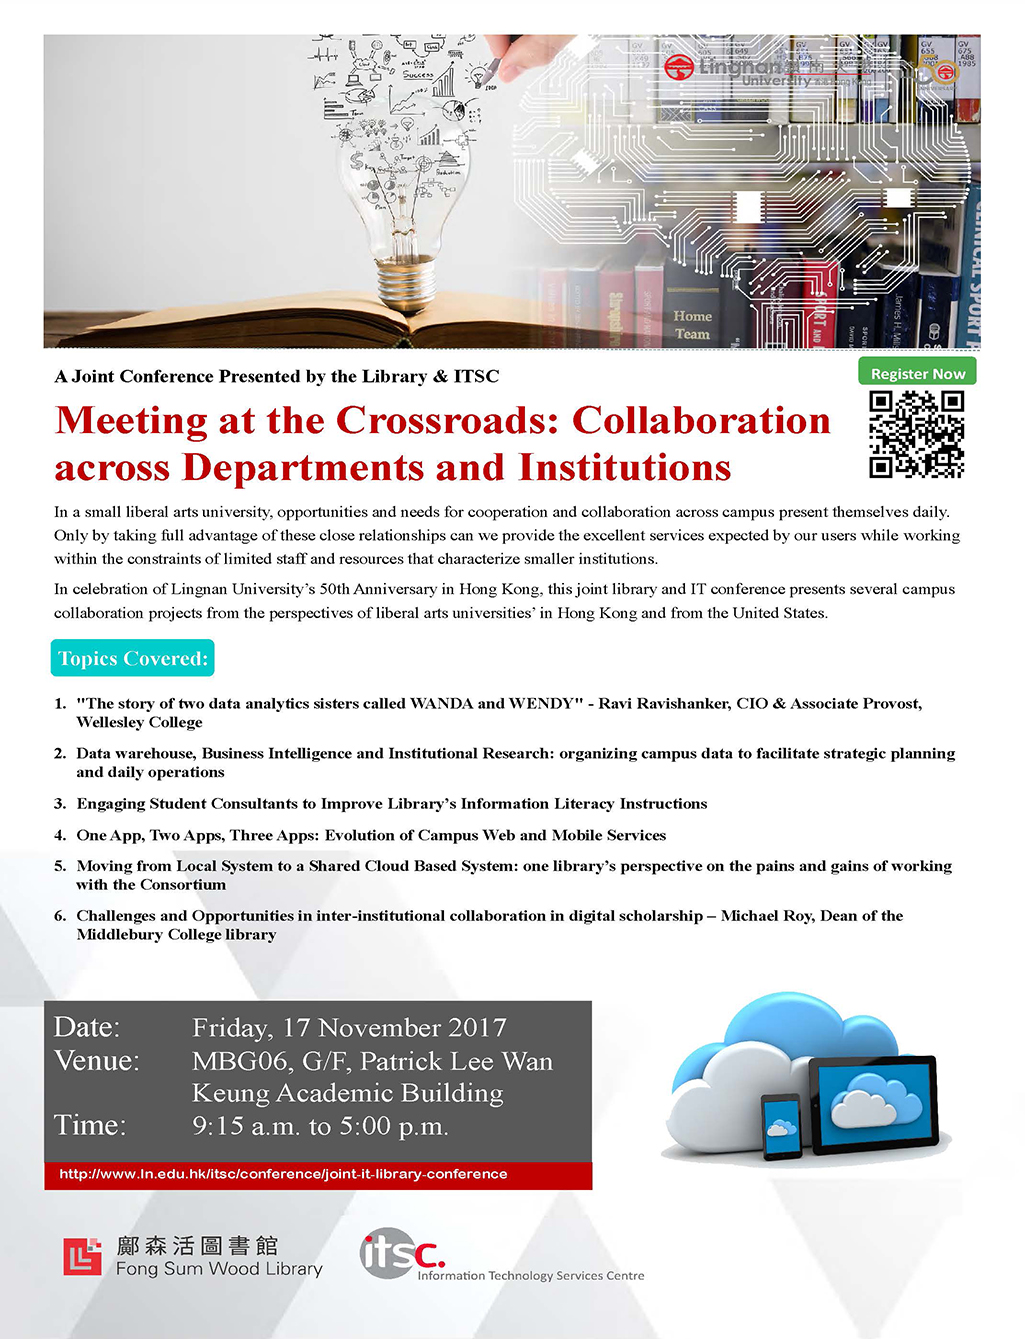 Meeting at the Crossroads: Collaboration across Departments and Institutions — A Joint Conference Presented by the Library and ITSC